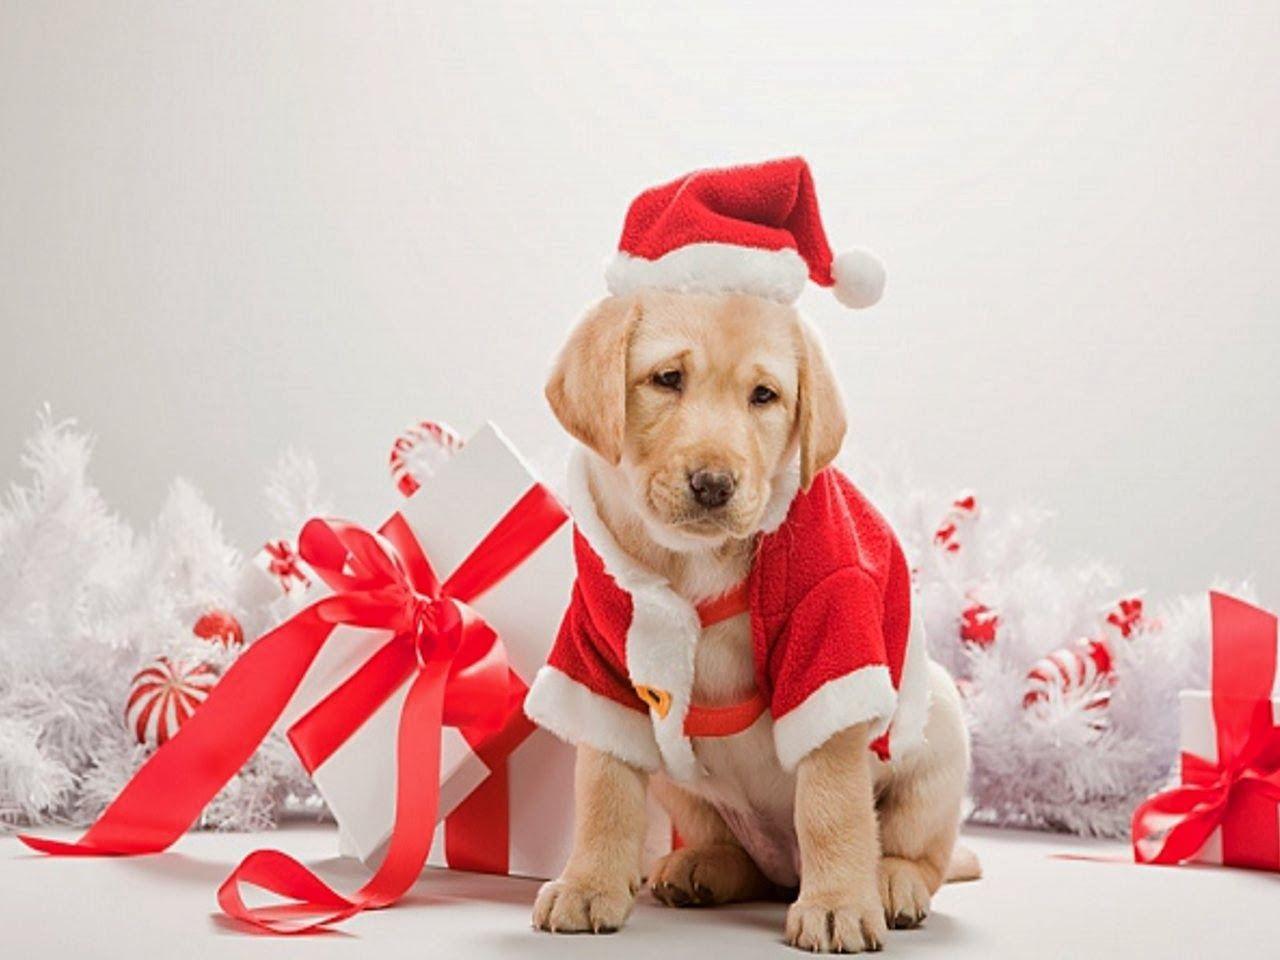 Cute Christmas Dog Wallpaper 2014. Cute dogs & dogs that I want